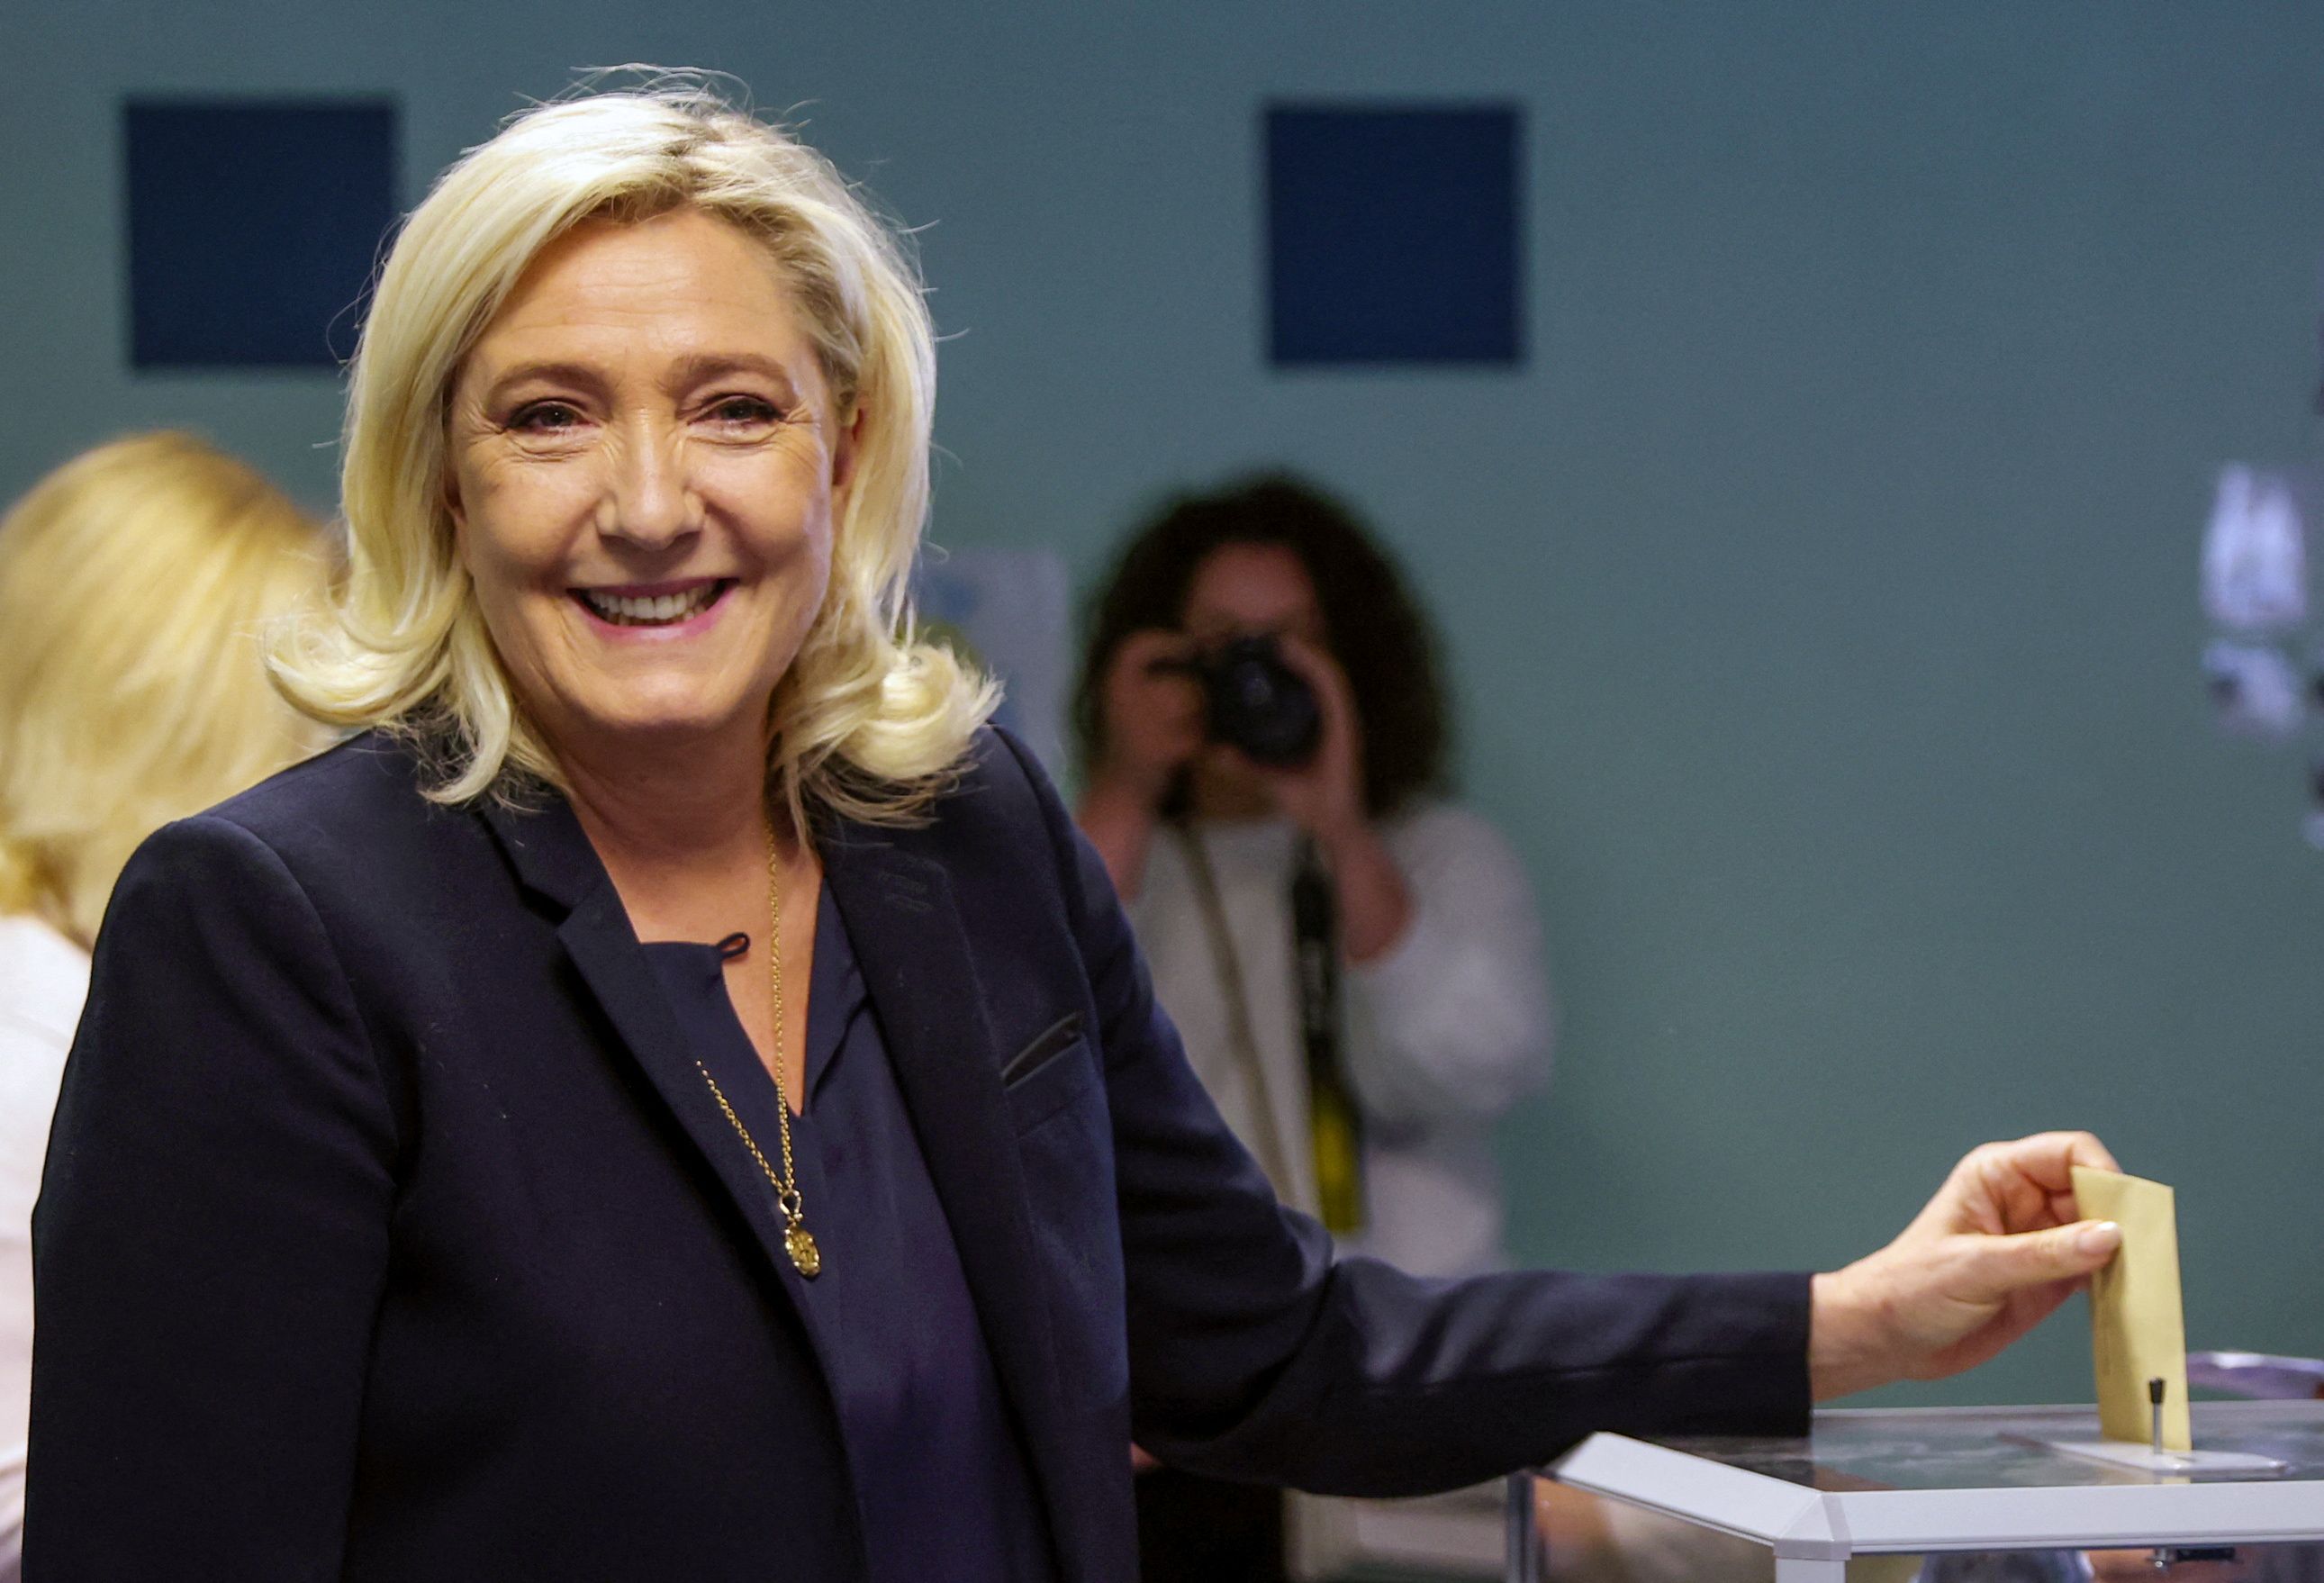 Marine Le Pen's National Rally party won its largest ever vote share in the lowest house